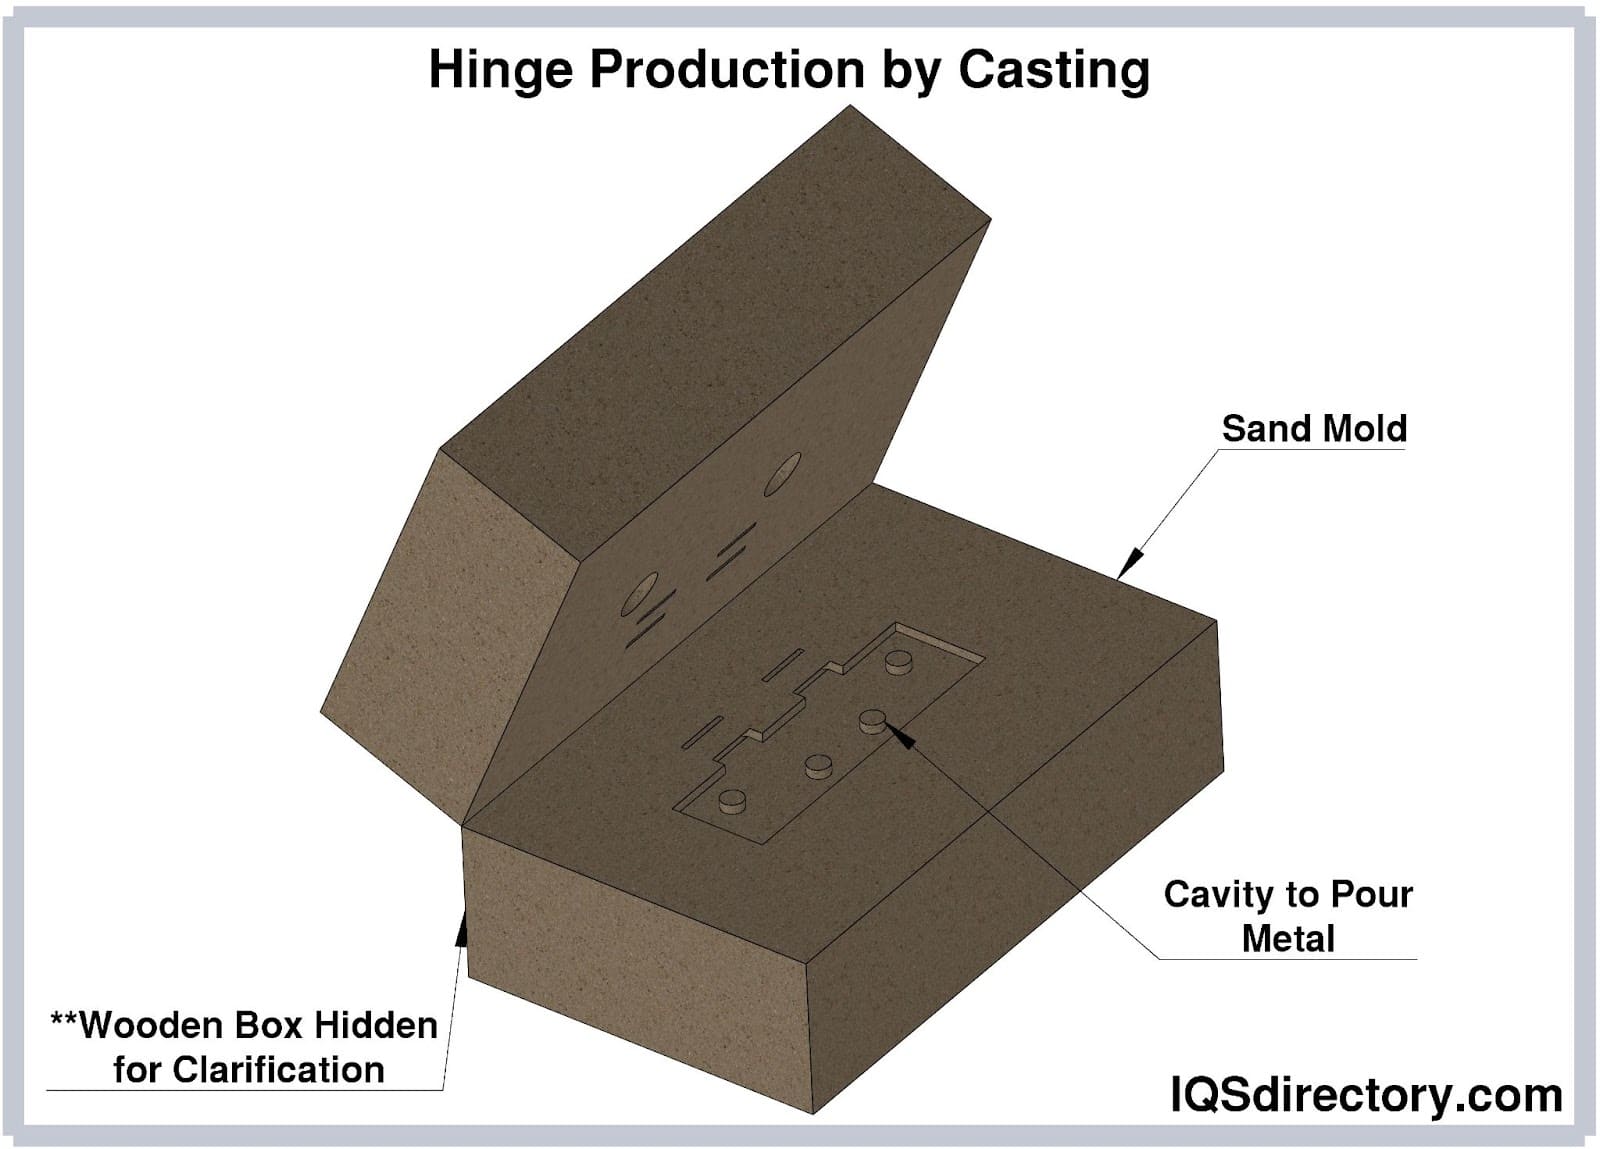 Hinge Production by Casting